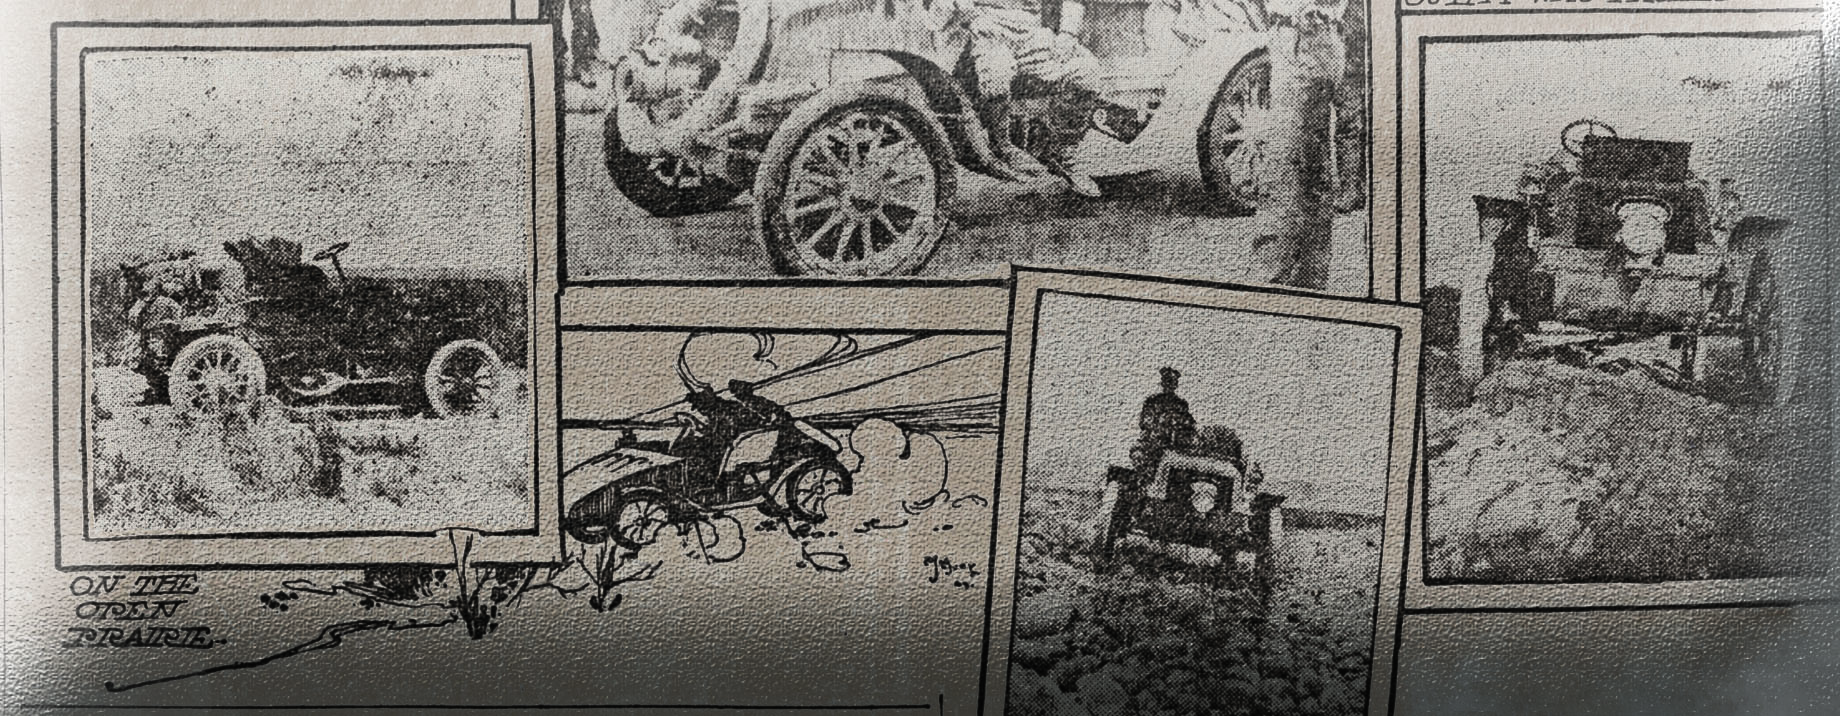 A composite image of newspaper clippings, showing various old-fashioned automobiles.